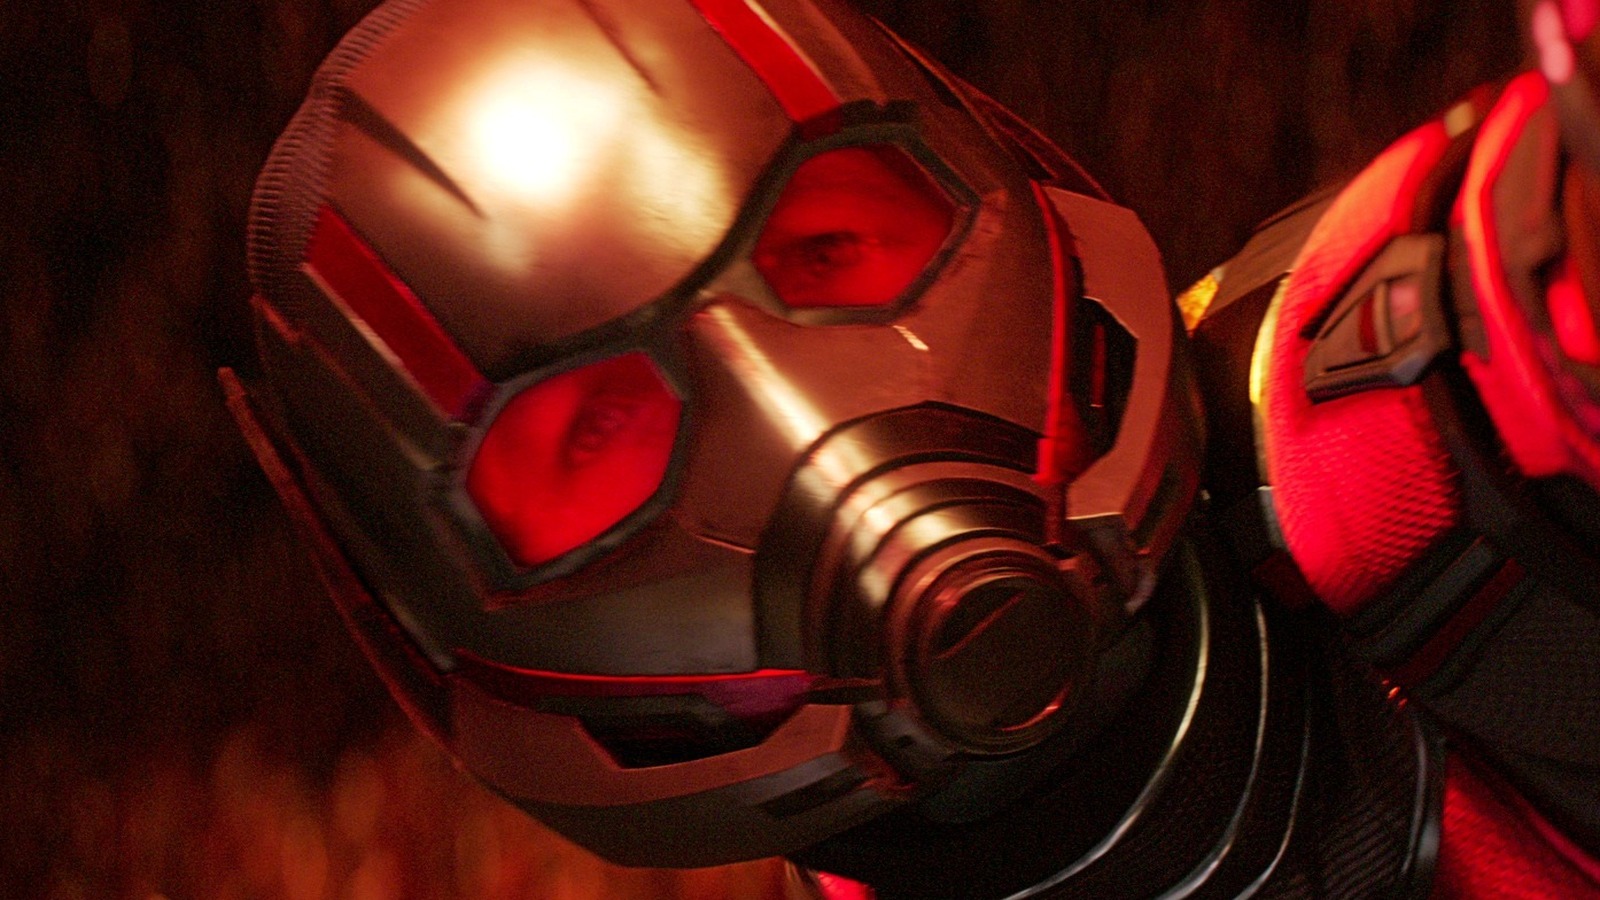 Ant Man' Sequel Has Largest MCU Weekend Box Office Drop